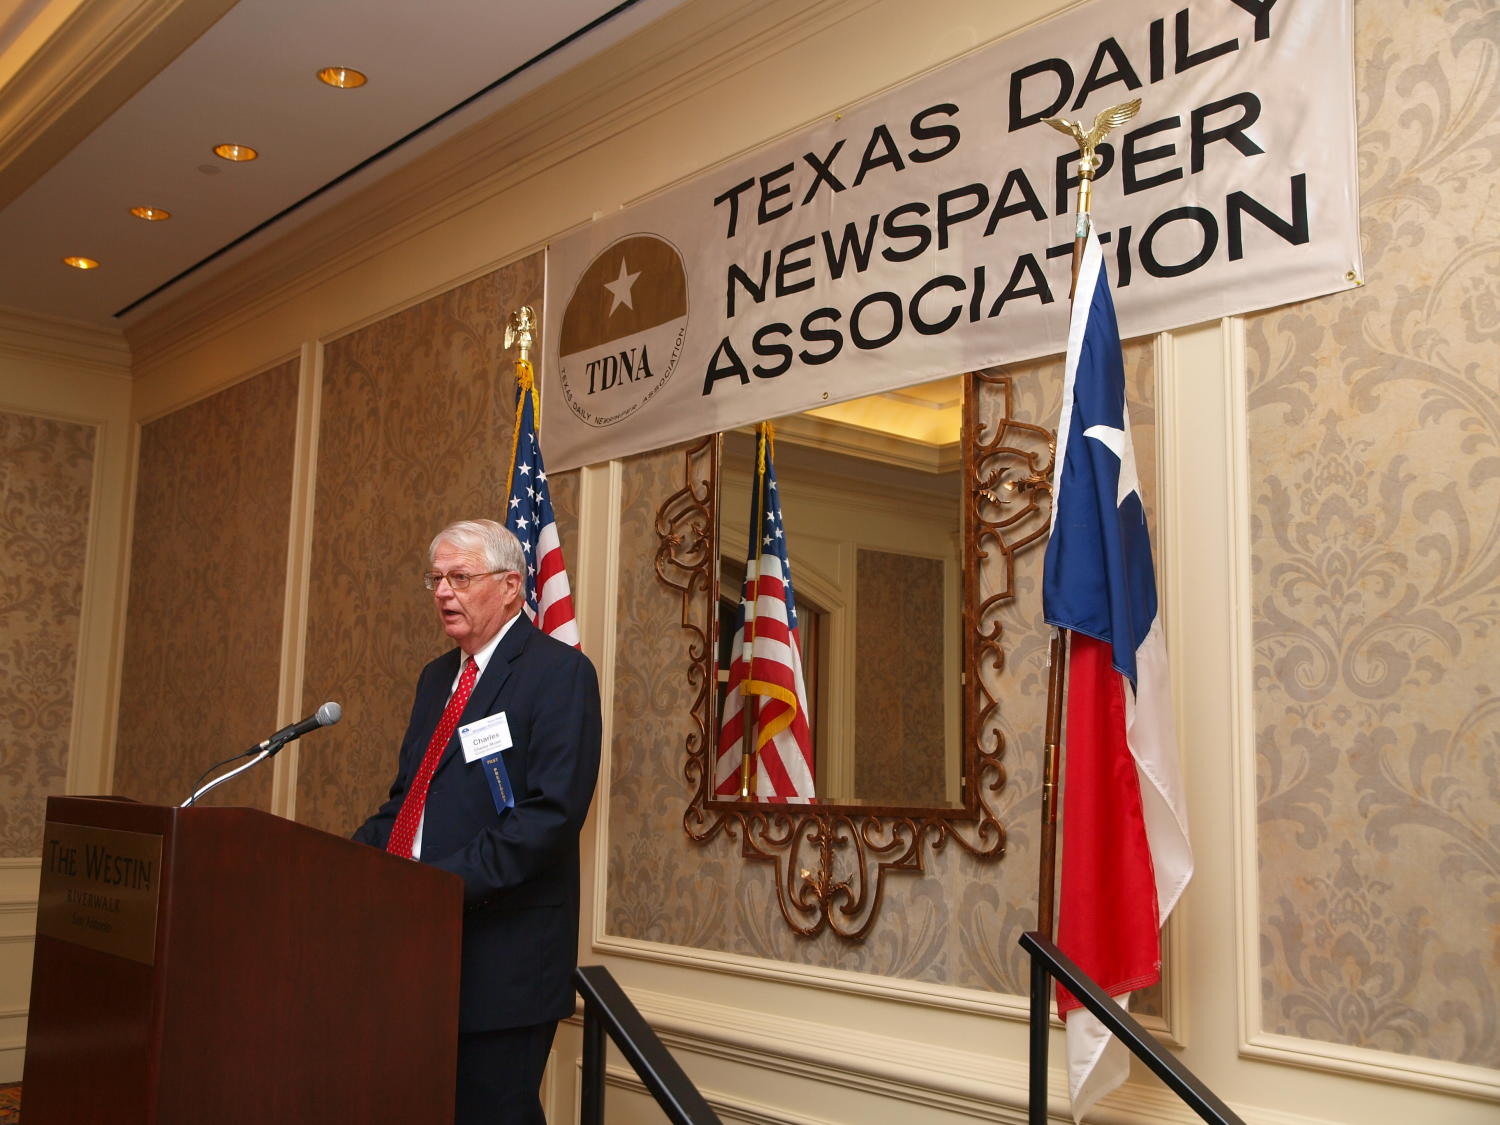 [Charles Moser giving a thank you speech at TDNA meeting], Photograph of Charles Moser standing at a wooden podium and addressing the guests, giving a thank you speech as he has accepted an award, at the 2008 Texas Daily Newspaper Association annual conference awards dinner, held at The Westin Riverwalk Hotel in San Antonio, Texas., 